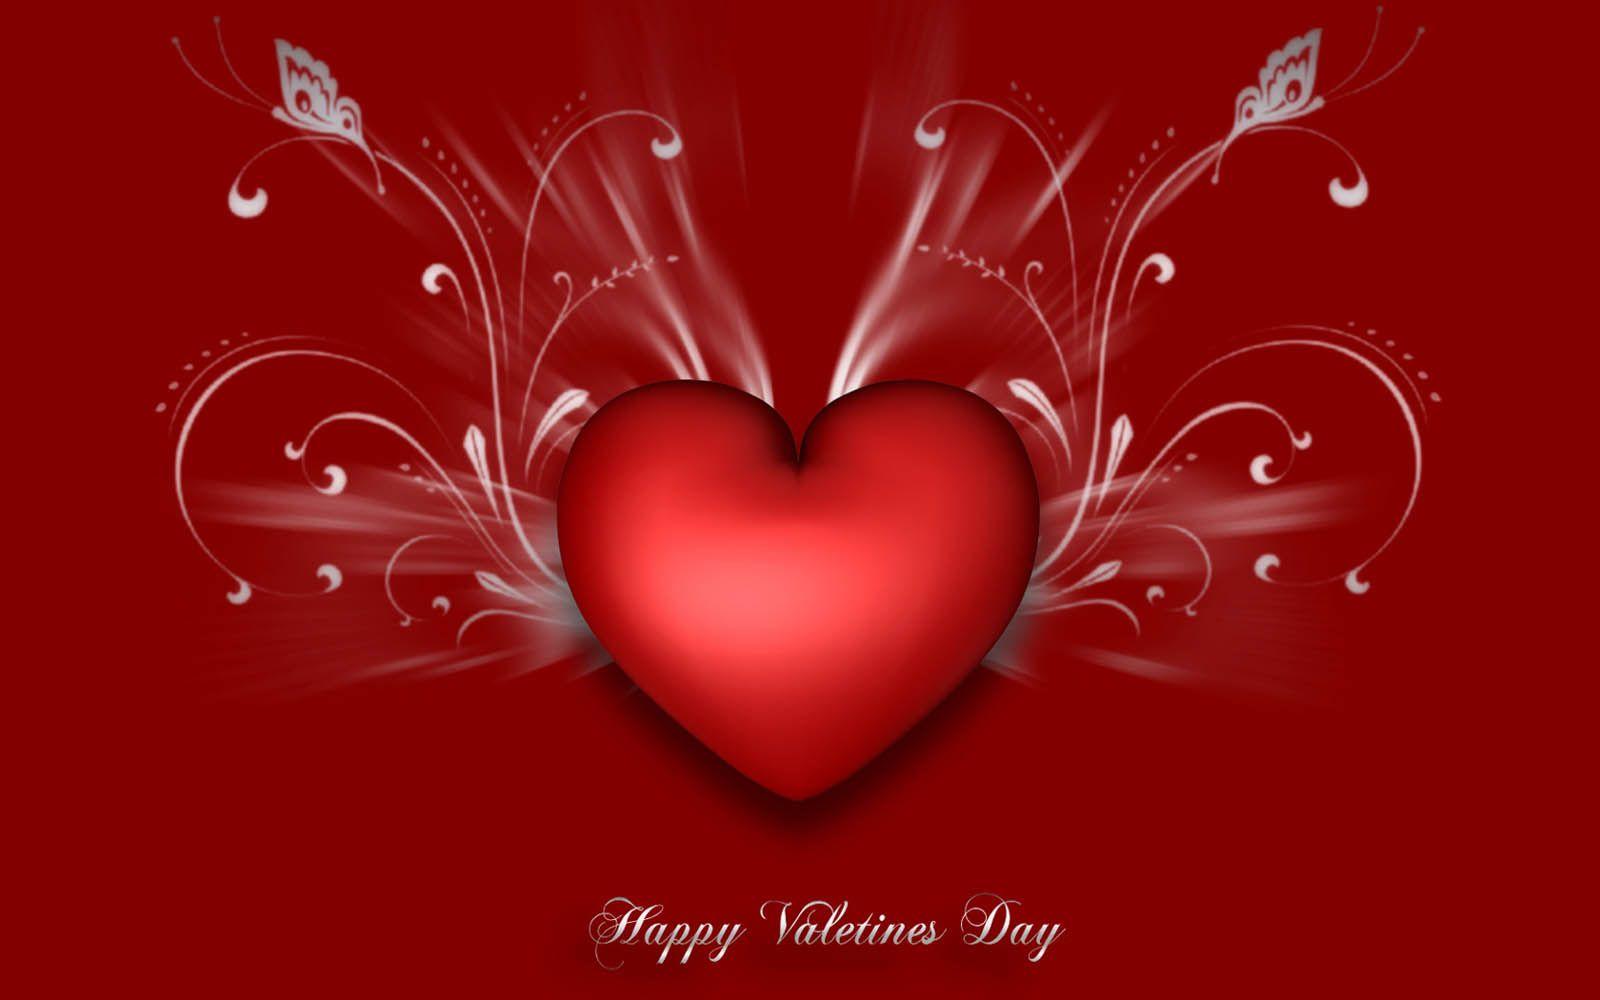 Backgrounds For Gt Valentines Day Wallpaper Valentine Wallpaper For Computer  Download Pc Android Mobile Wallpapers Windows Name Nature Animation  फट  शयर